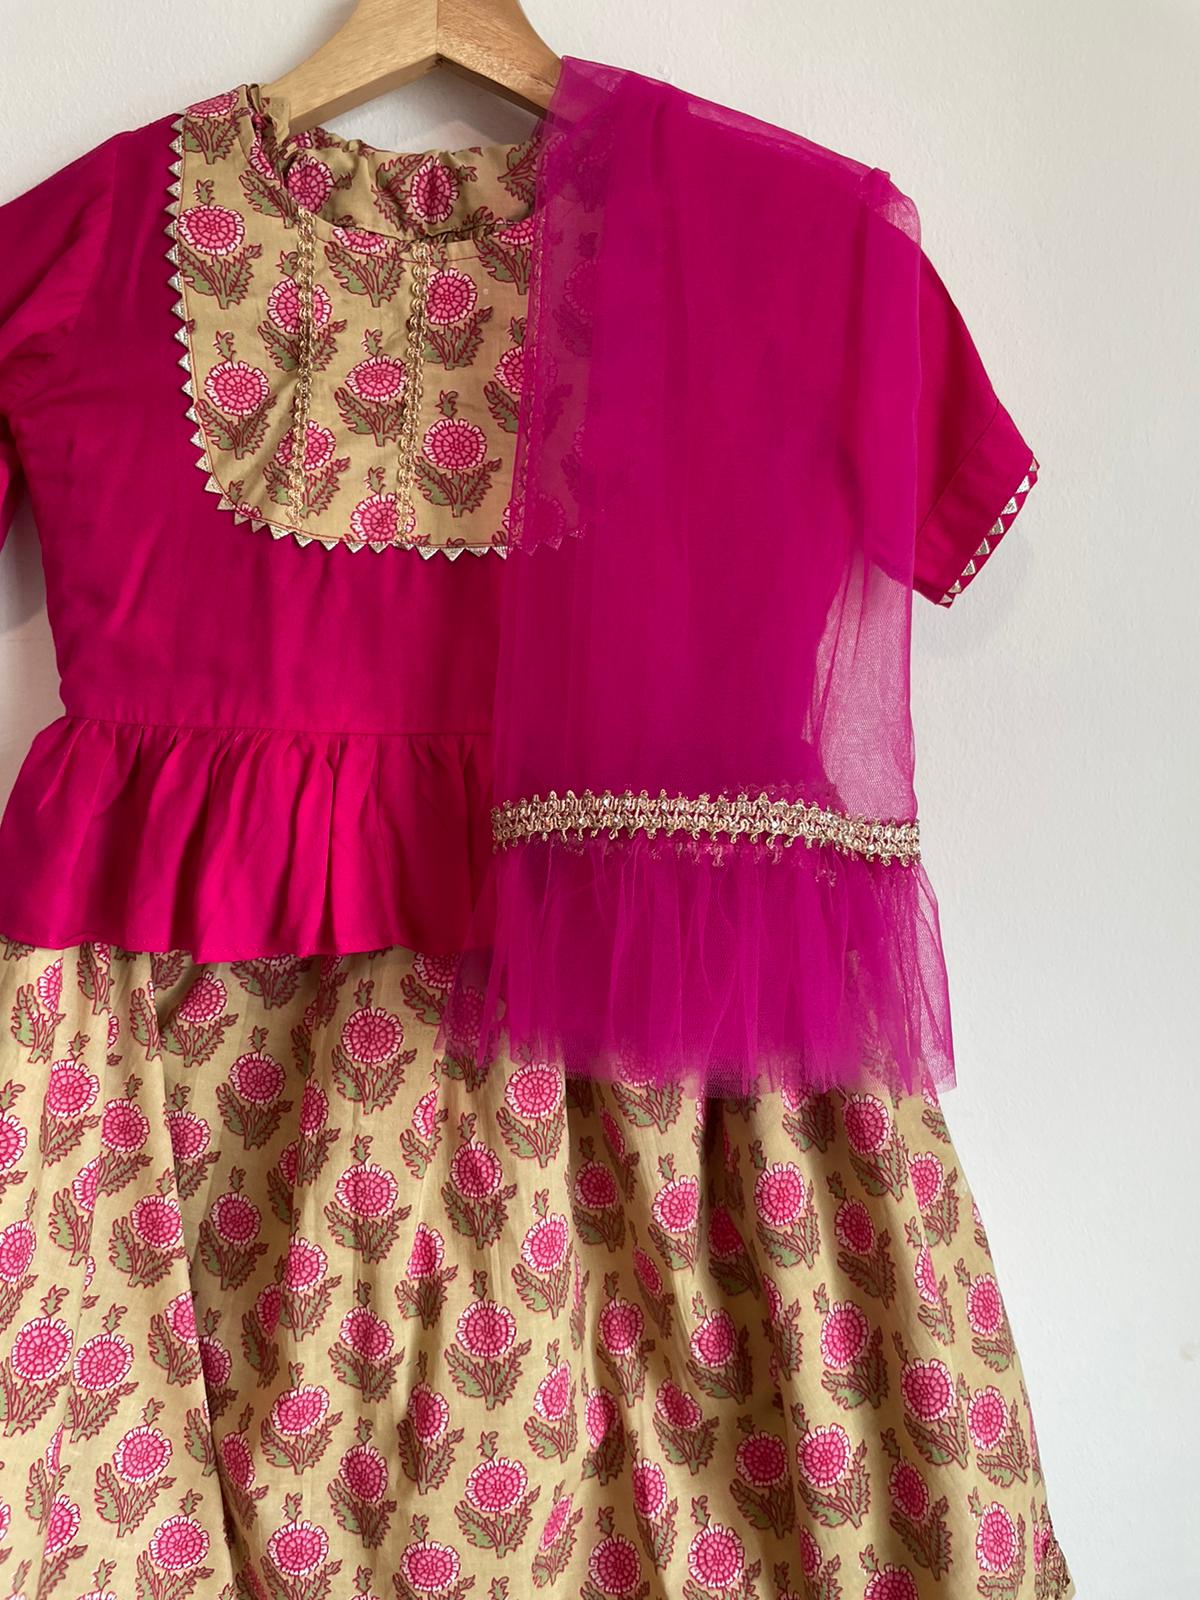 Handmade and affordable lehnga choli dress for girls made from high quality cotton